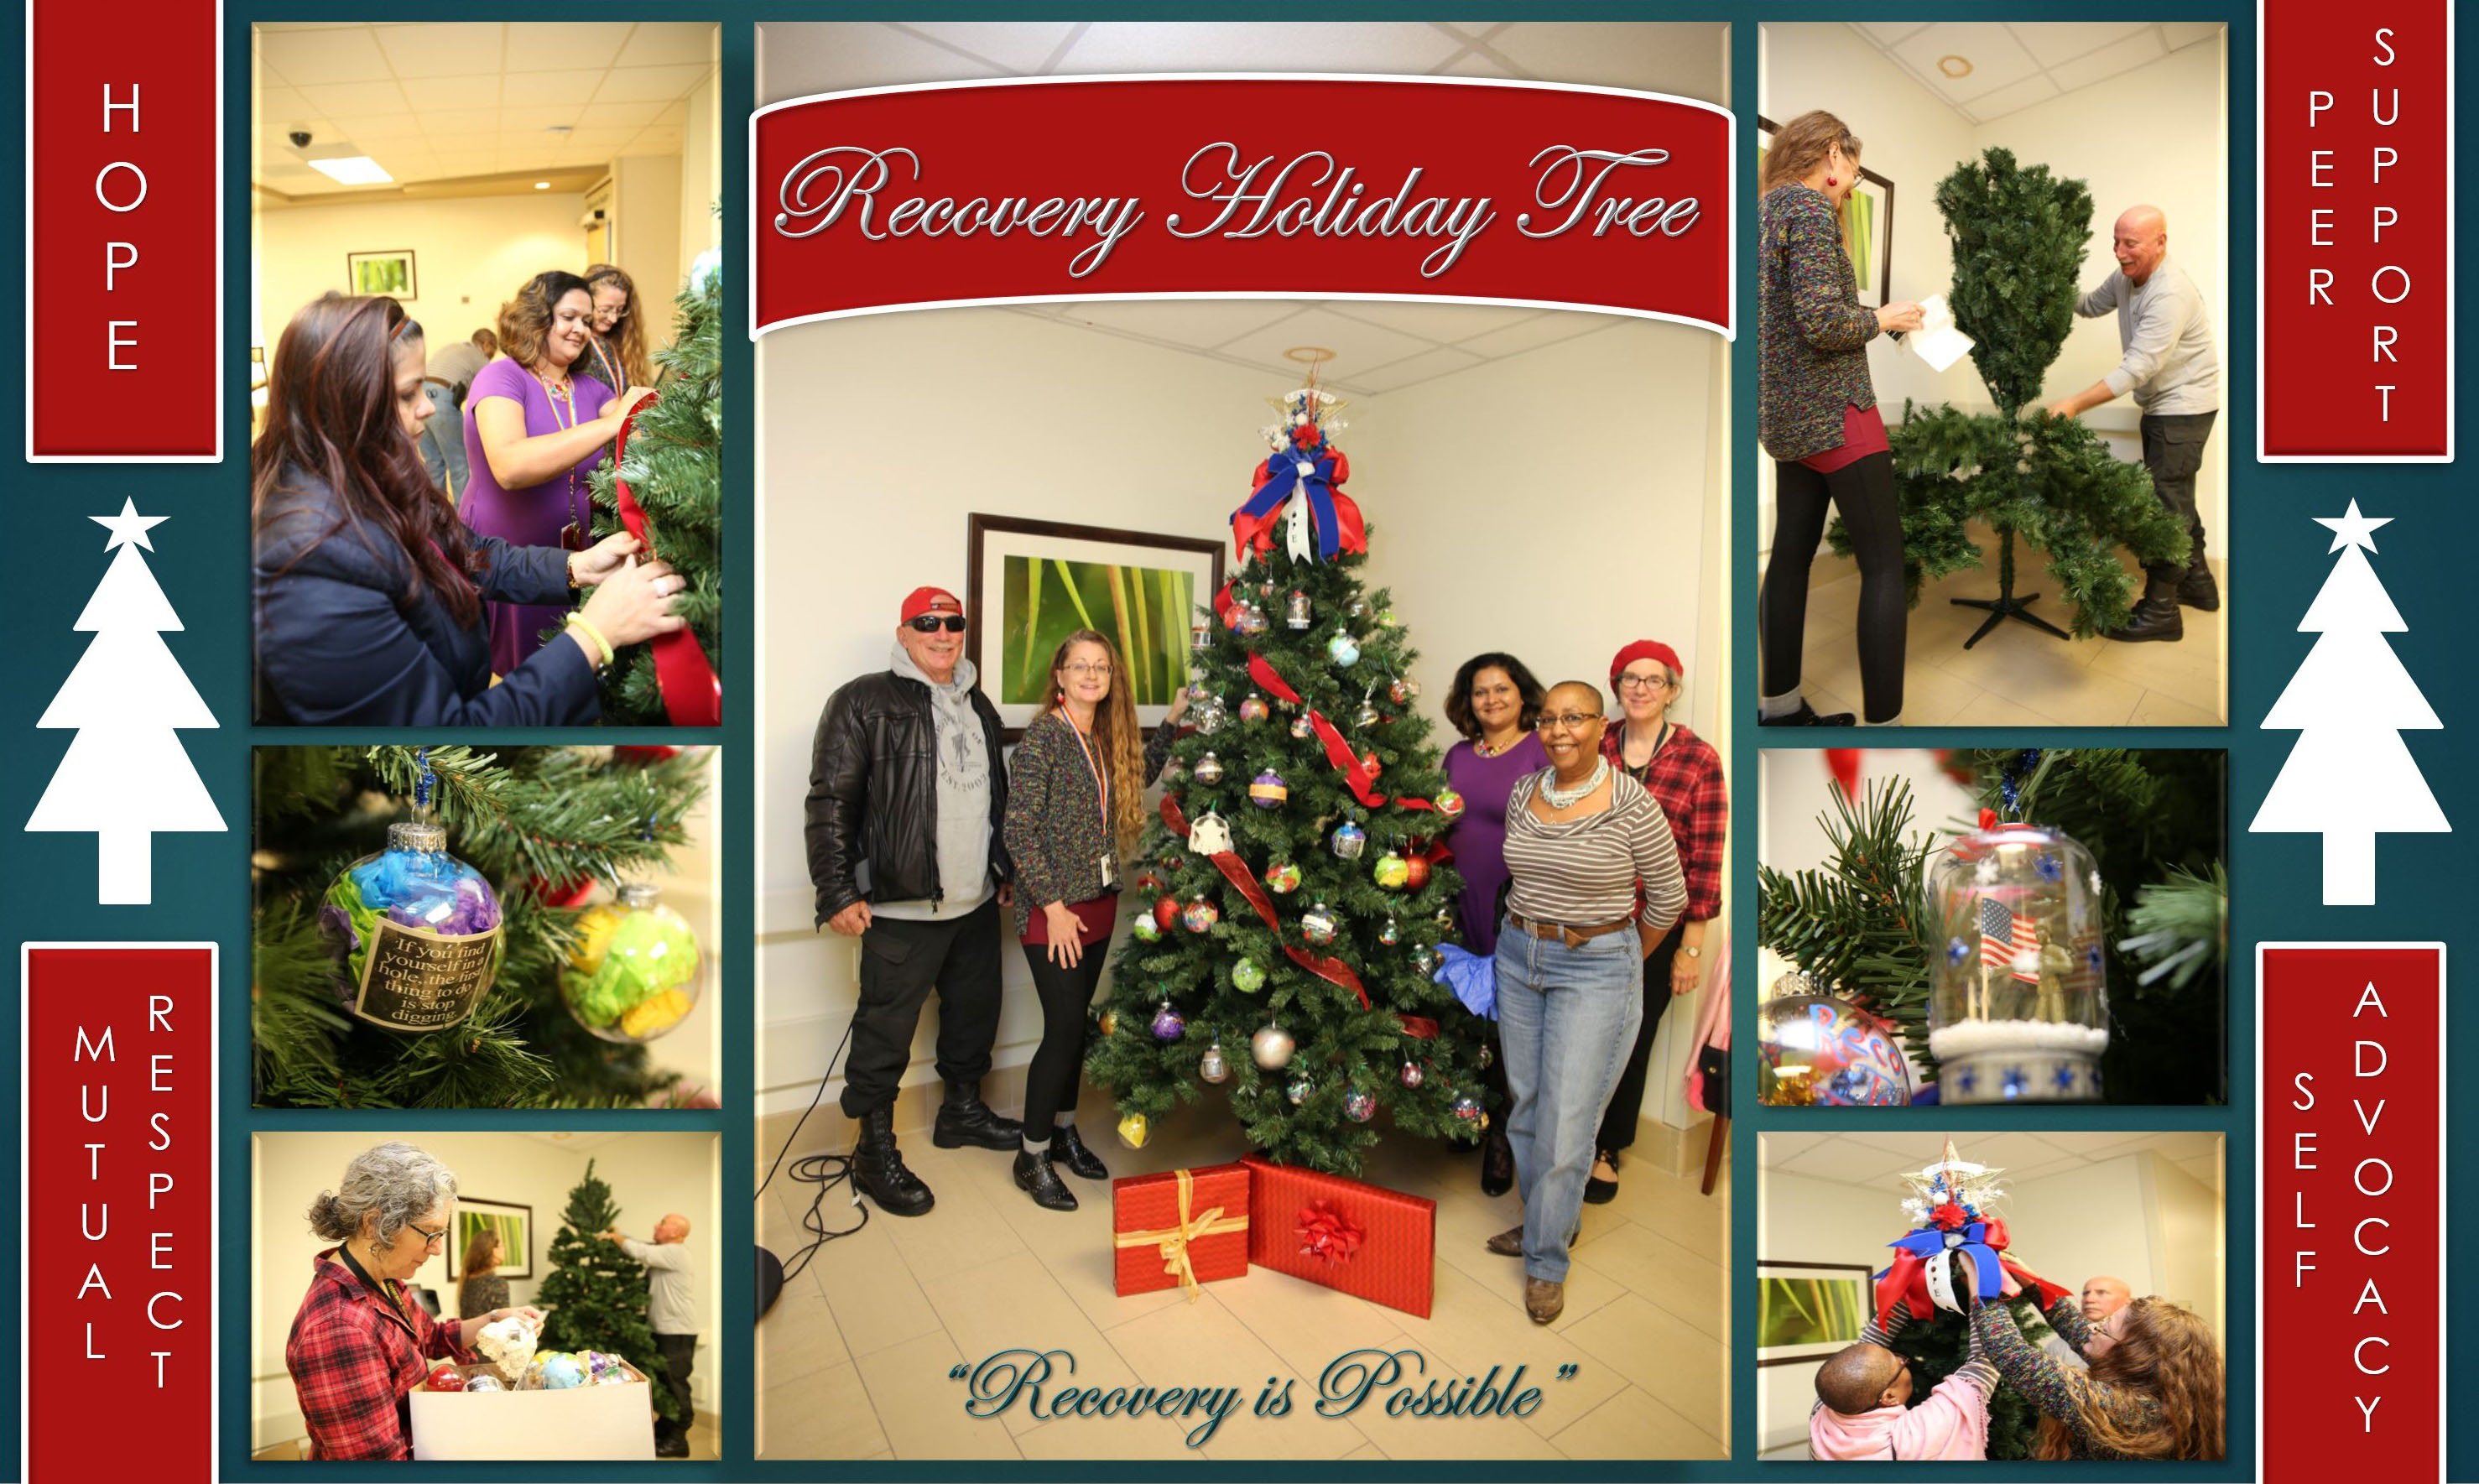 Photo collage of VA Texas Valley Coastal Bend Health Care System (VCB) employees and Veterans participating in the Recovery Holiday Tree Project at the VA Health Care Center at Harlingen, Texas, on December 11, 2018. (U.S. Department of Veterans Affairs photos and photo collage by Luis H. Loza Gutierrez)